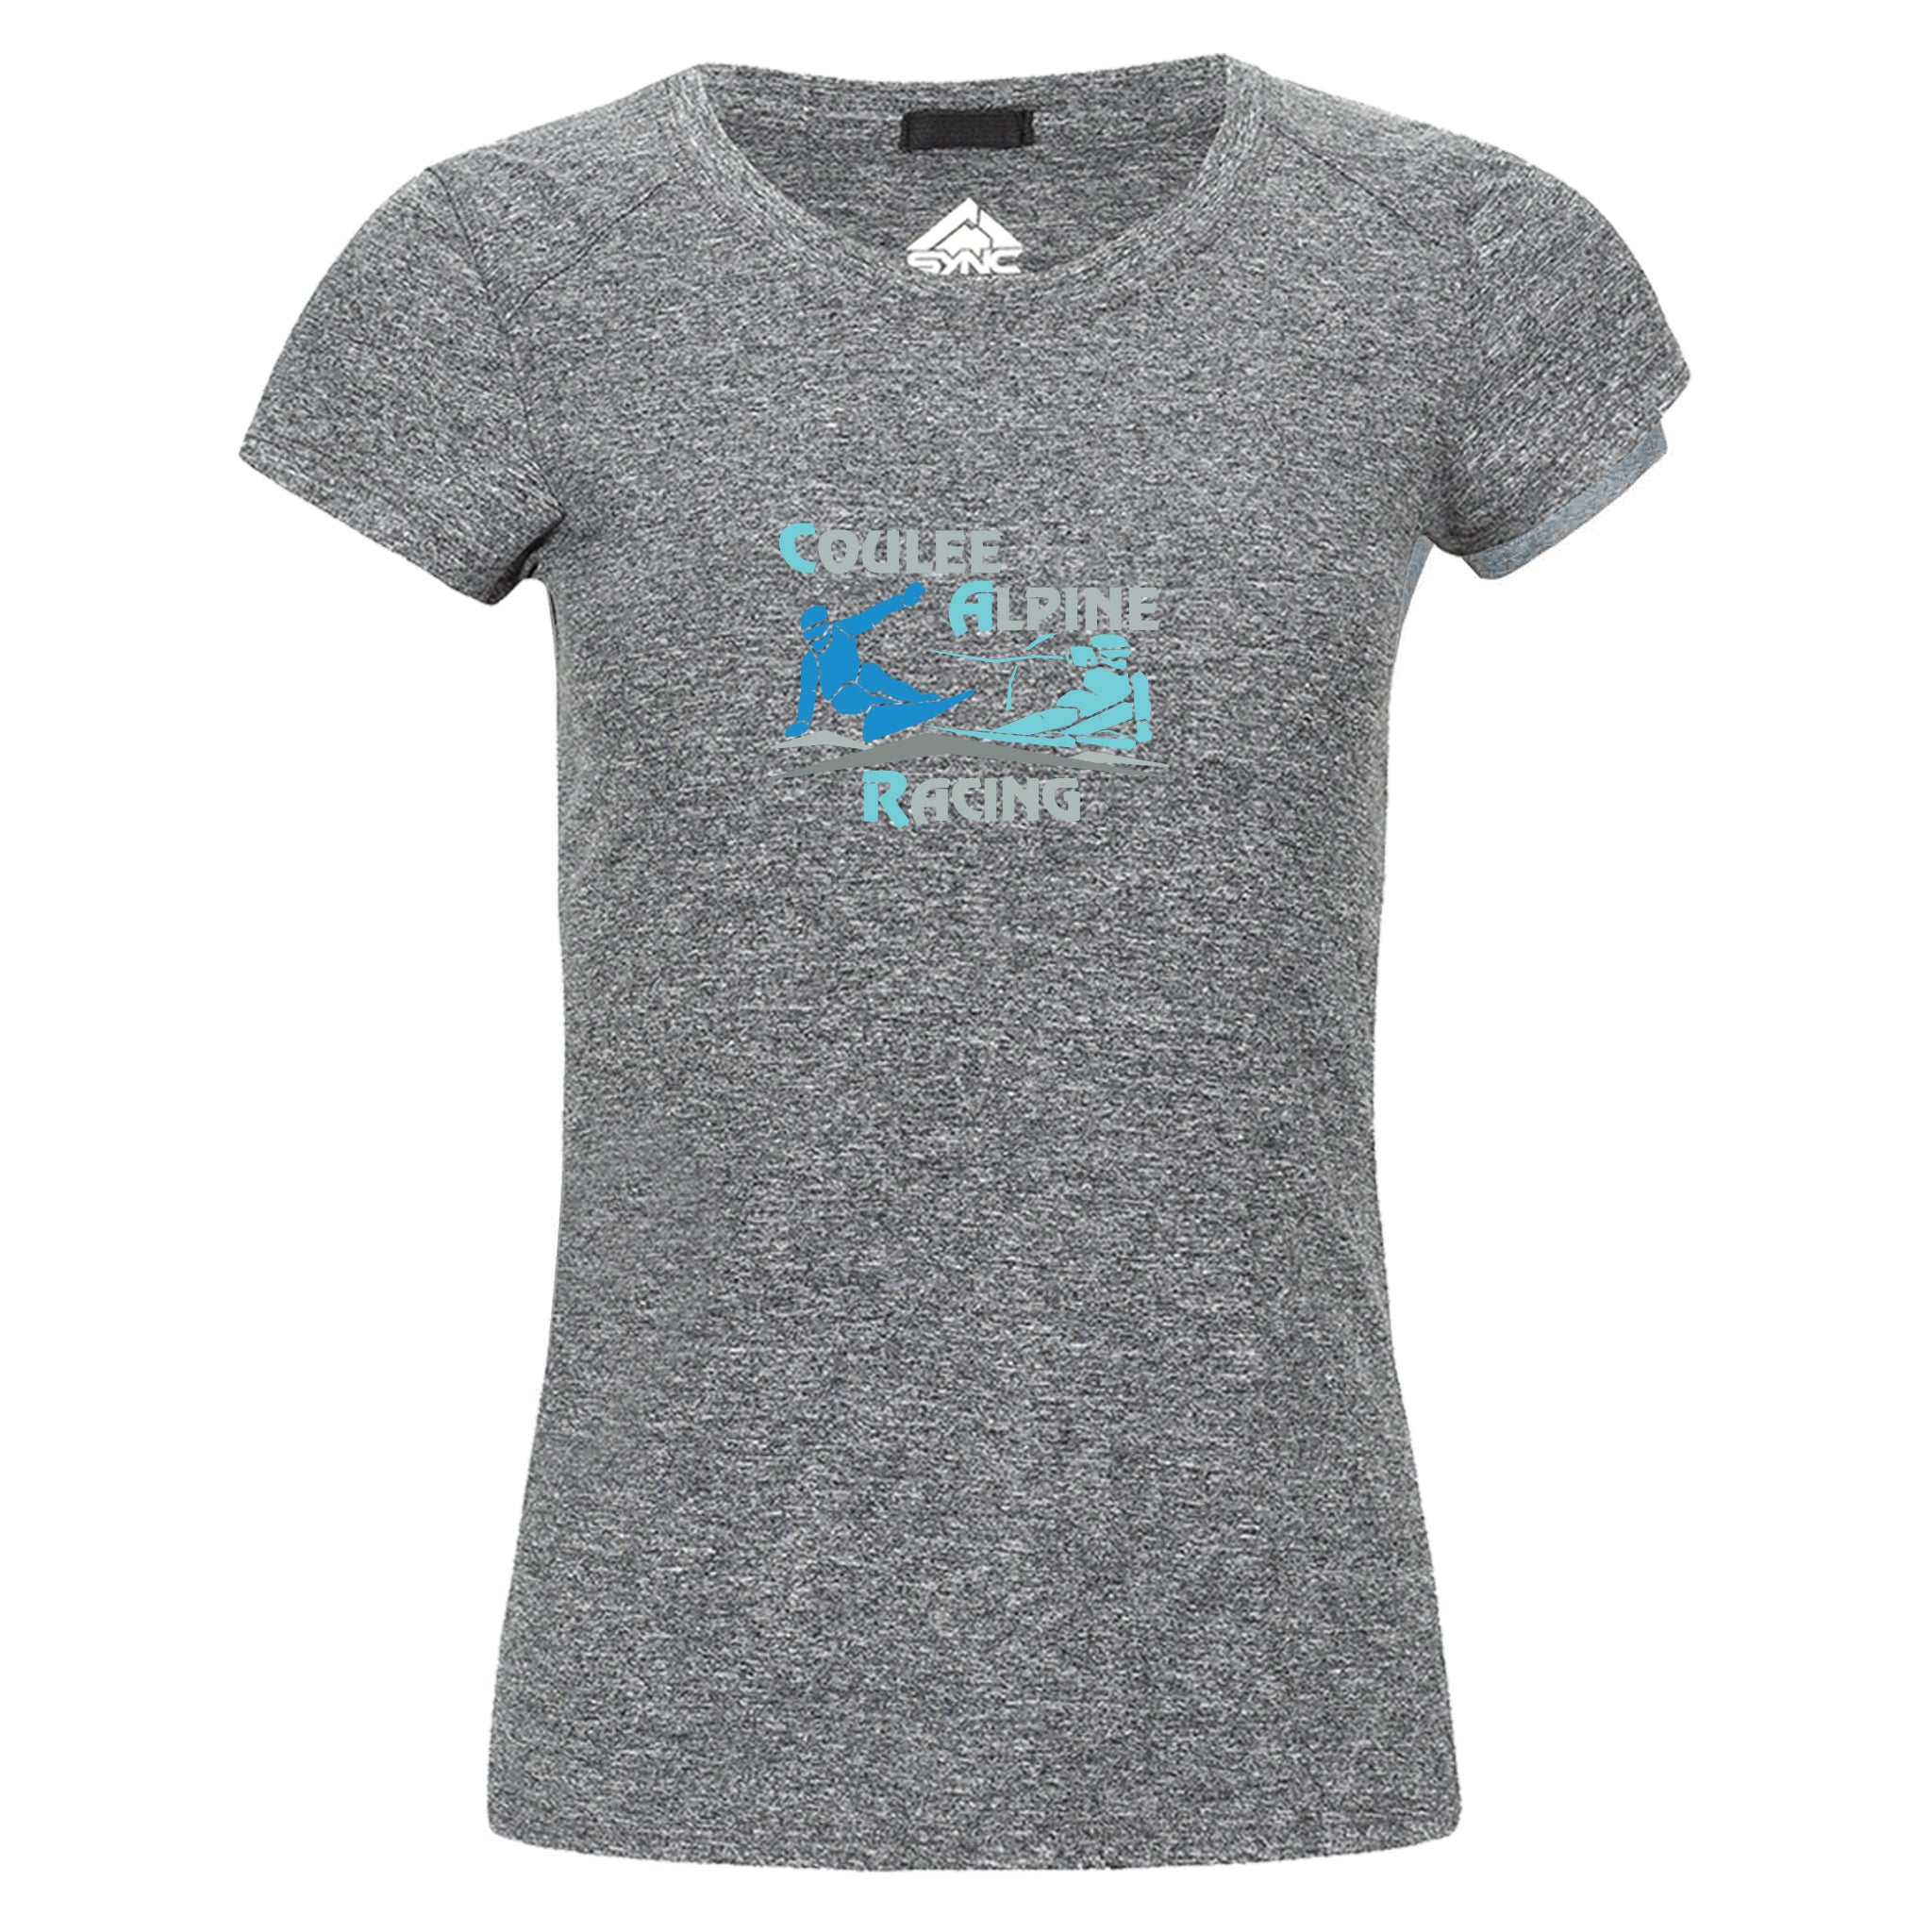 Women's Deluge Short Sleeve - Coulee